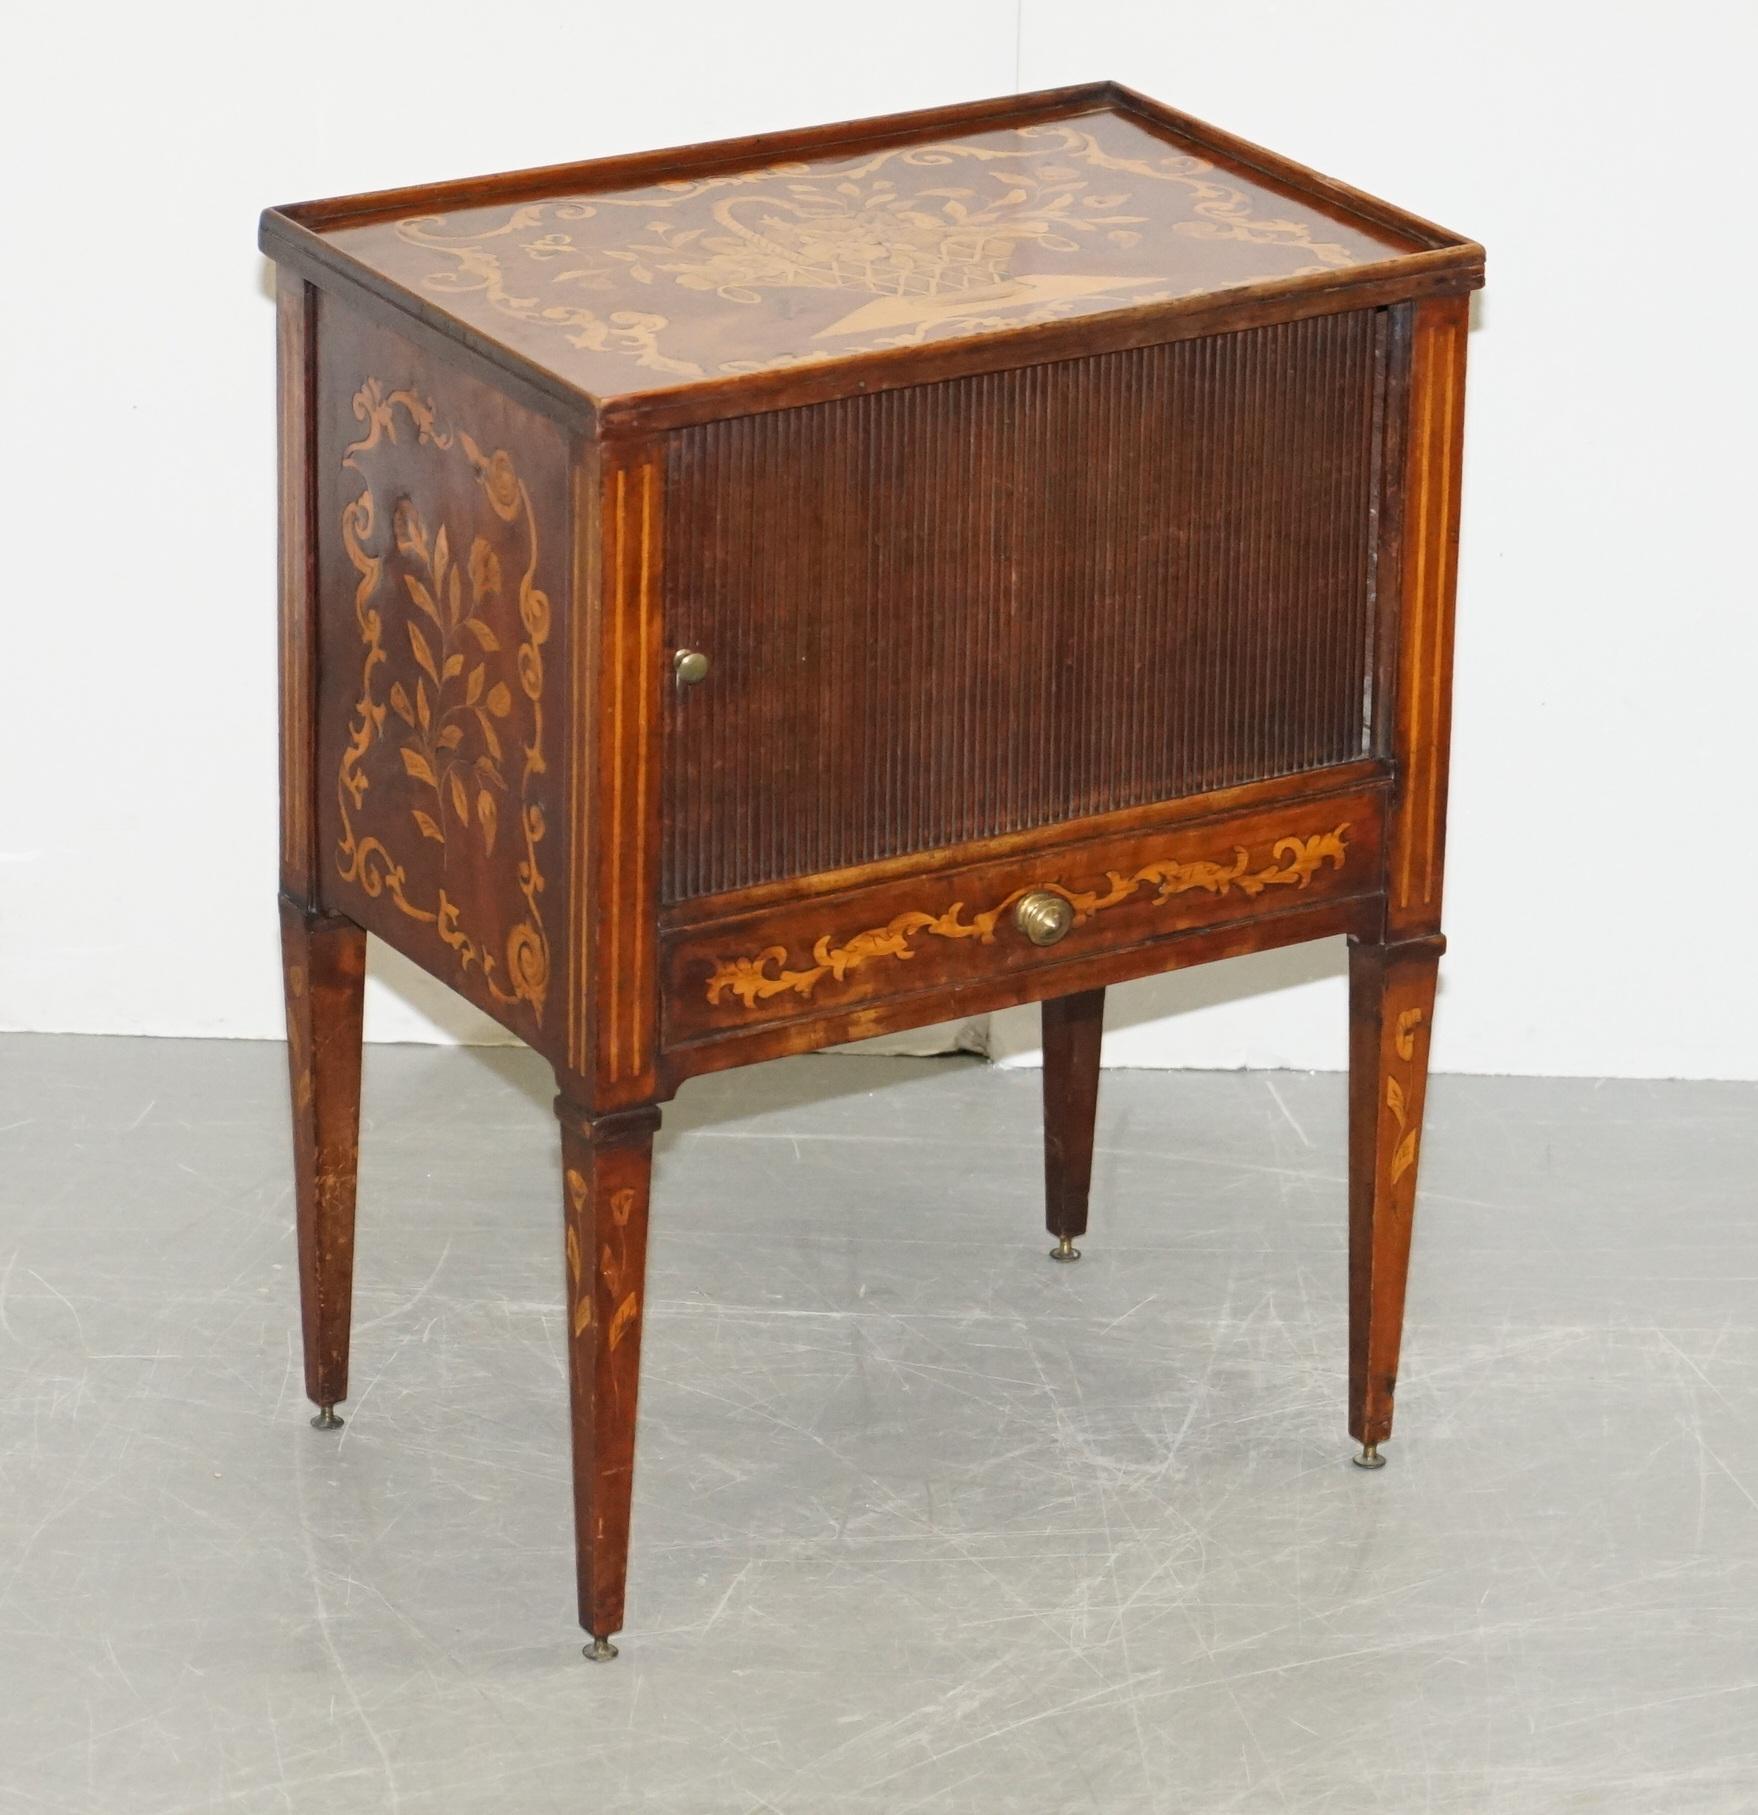 We are delighted to offer for sale this very rare tambour fronted 19th century circa 1820 Dutch marquetry inlaid side table

A very good looking and well made piece, hard to believe its over 200 years old! The timber patina is glorious, it looks